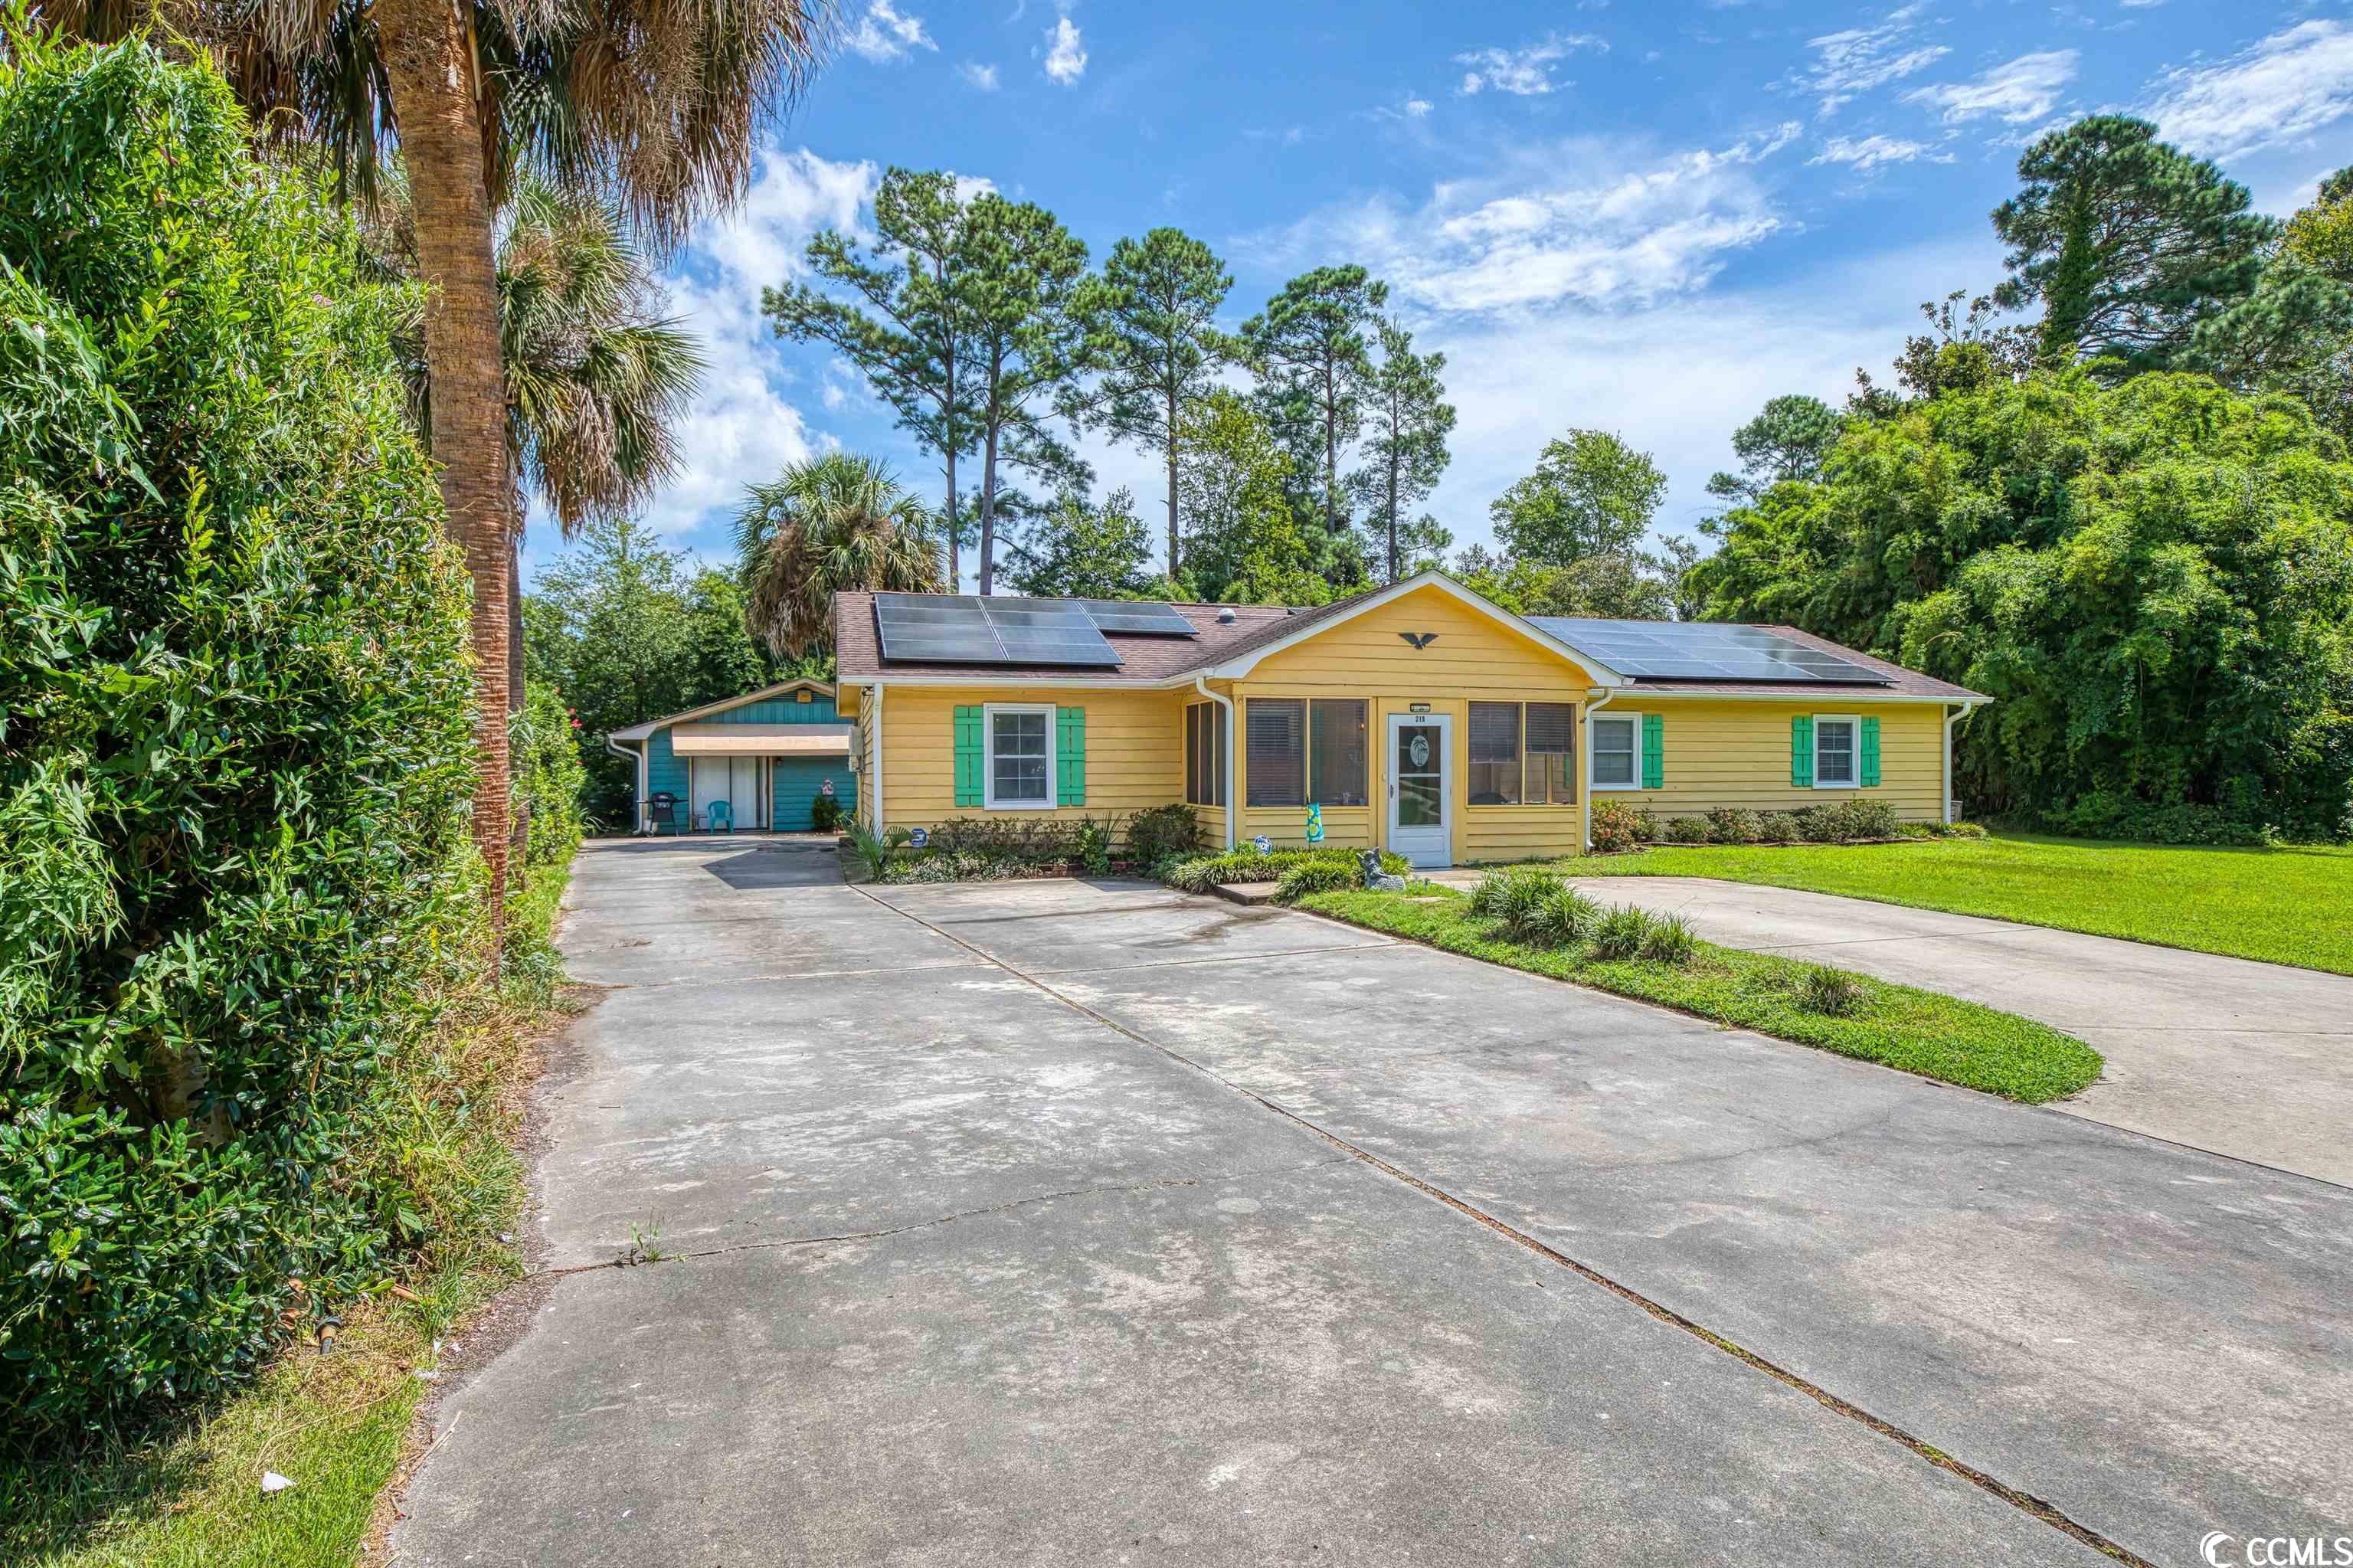 come check out 219 misty pine drive with a detached mother in law suite or rental opportunity, located approximately one mile from surfside beach! this home sits on a quiet cul-de-sac providing two large driveways in the front of the home and additional driveway on the right side of the home leading to a concrete pad perfect for storing your rv, boat, golf cart and any other toys you may have, a large fenced in backyard, two storage sheds, a screened in front porch, a back concrete patio and back deck! on the outside of this home, you will find solar panels, gutters, 2 hvac units, motion sensor lights, and an additional storage facility off of the back of the home where the water heater is located. you will be excited to tour the additional home on the property that is currently used as a short-term rental. it has a full kitchen, full bathroom, one bedroom, a living/dining area, washer and dryer room and its own fenced in yard and patio! moving into the home, you will enter through a screened in porch where you can enjoy your morning coffee before gathering your belongings and heading to the beach. entering the home, you are greeted by a foyer and a coat closet, on the left you will walk through double doors to a room that is currently a bedroom, however this room can be used as a formal dining room, office or study, the opportunities are endless for your needs! the kitchen features granite countertops, upgraded kitchen cabinets, a double oven, stainless steel appliances and ample storage. off of the kitchen is one of the ensuites in the home and the bathroom has an upgraded walk-in shower with dual shower heads. walking back through the kitchen you will enjoy the family room and dining area combination perfect for enjoying the company of others. the beautiful brick, wood burning fireplace and vaulted ceilings with wood beams boasts old charm that brings warmth and comfort. off of the family room is the laundry room and additional storage room with access to the attic. walking to the right side of the house, down the hallway is a guest bathroom, hall closet and three additional bedrooms. one of the three additional bedrooms features a second ensuite and doors leading to the bright oversized carolina room, perfect for enjoying games and game day with your friends and family. the owners have maximized the space by adding multiple beds to the rooms. you don’t want to miss the opportunity to own this rare home!!  all measurements are estimated and should be verified by buyer(s). buyer agent/buyer to verify all hoa information and square footage.